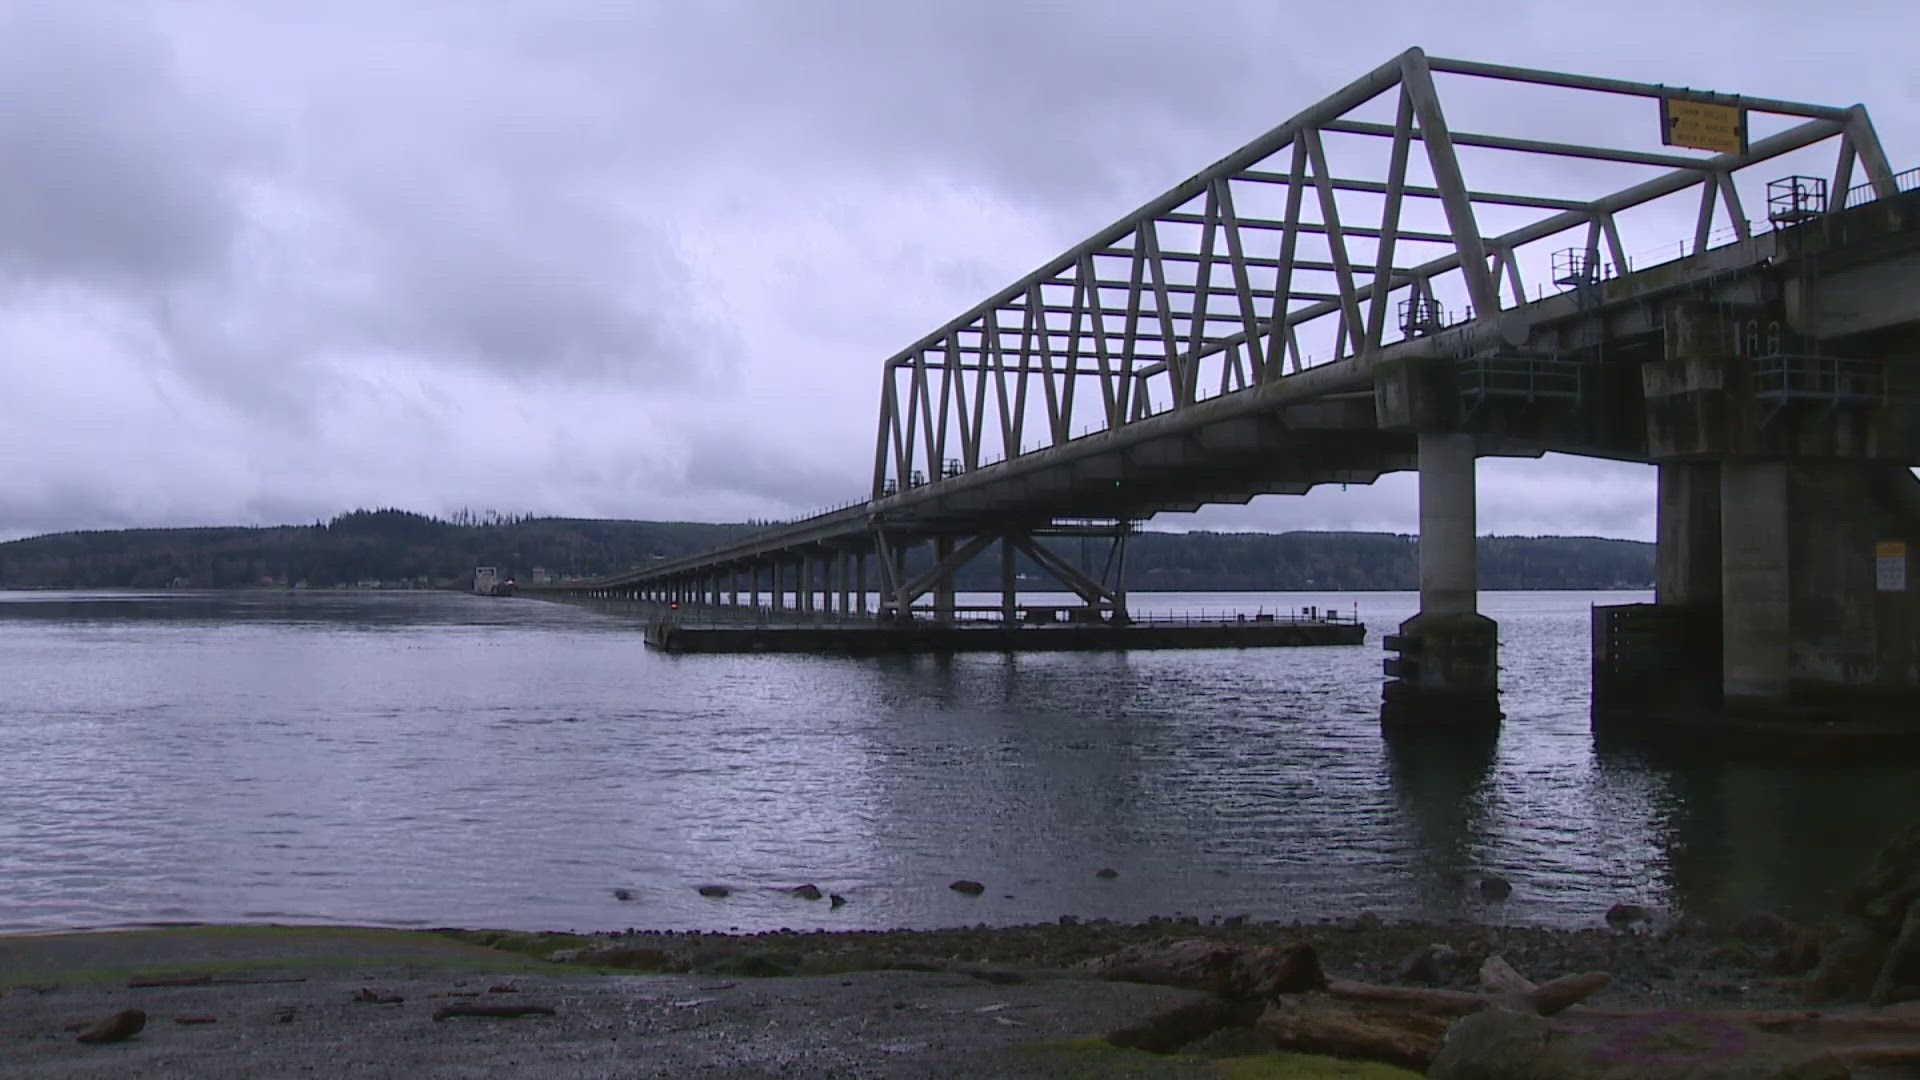 The Hood Canal Bridge is in need of important repairs that require calm winds and tides.